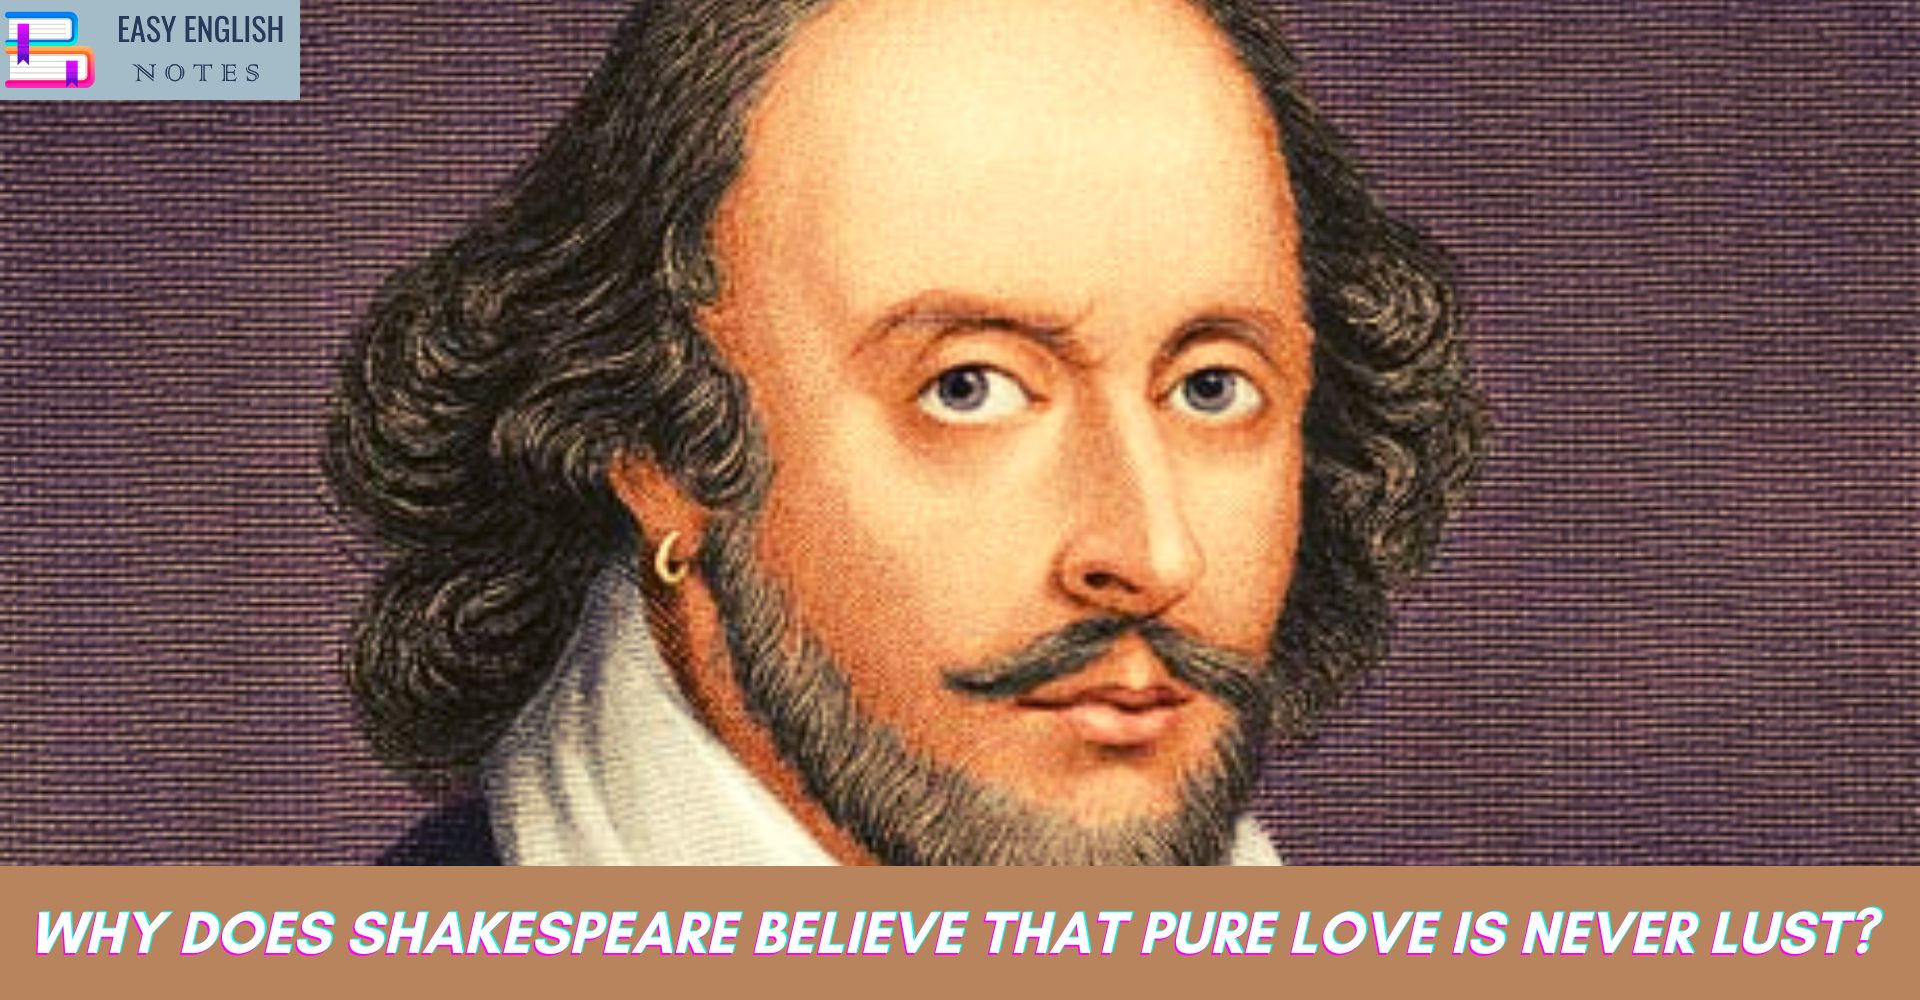 Why does Shakespeare believe that pure love is never lust?